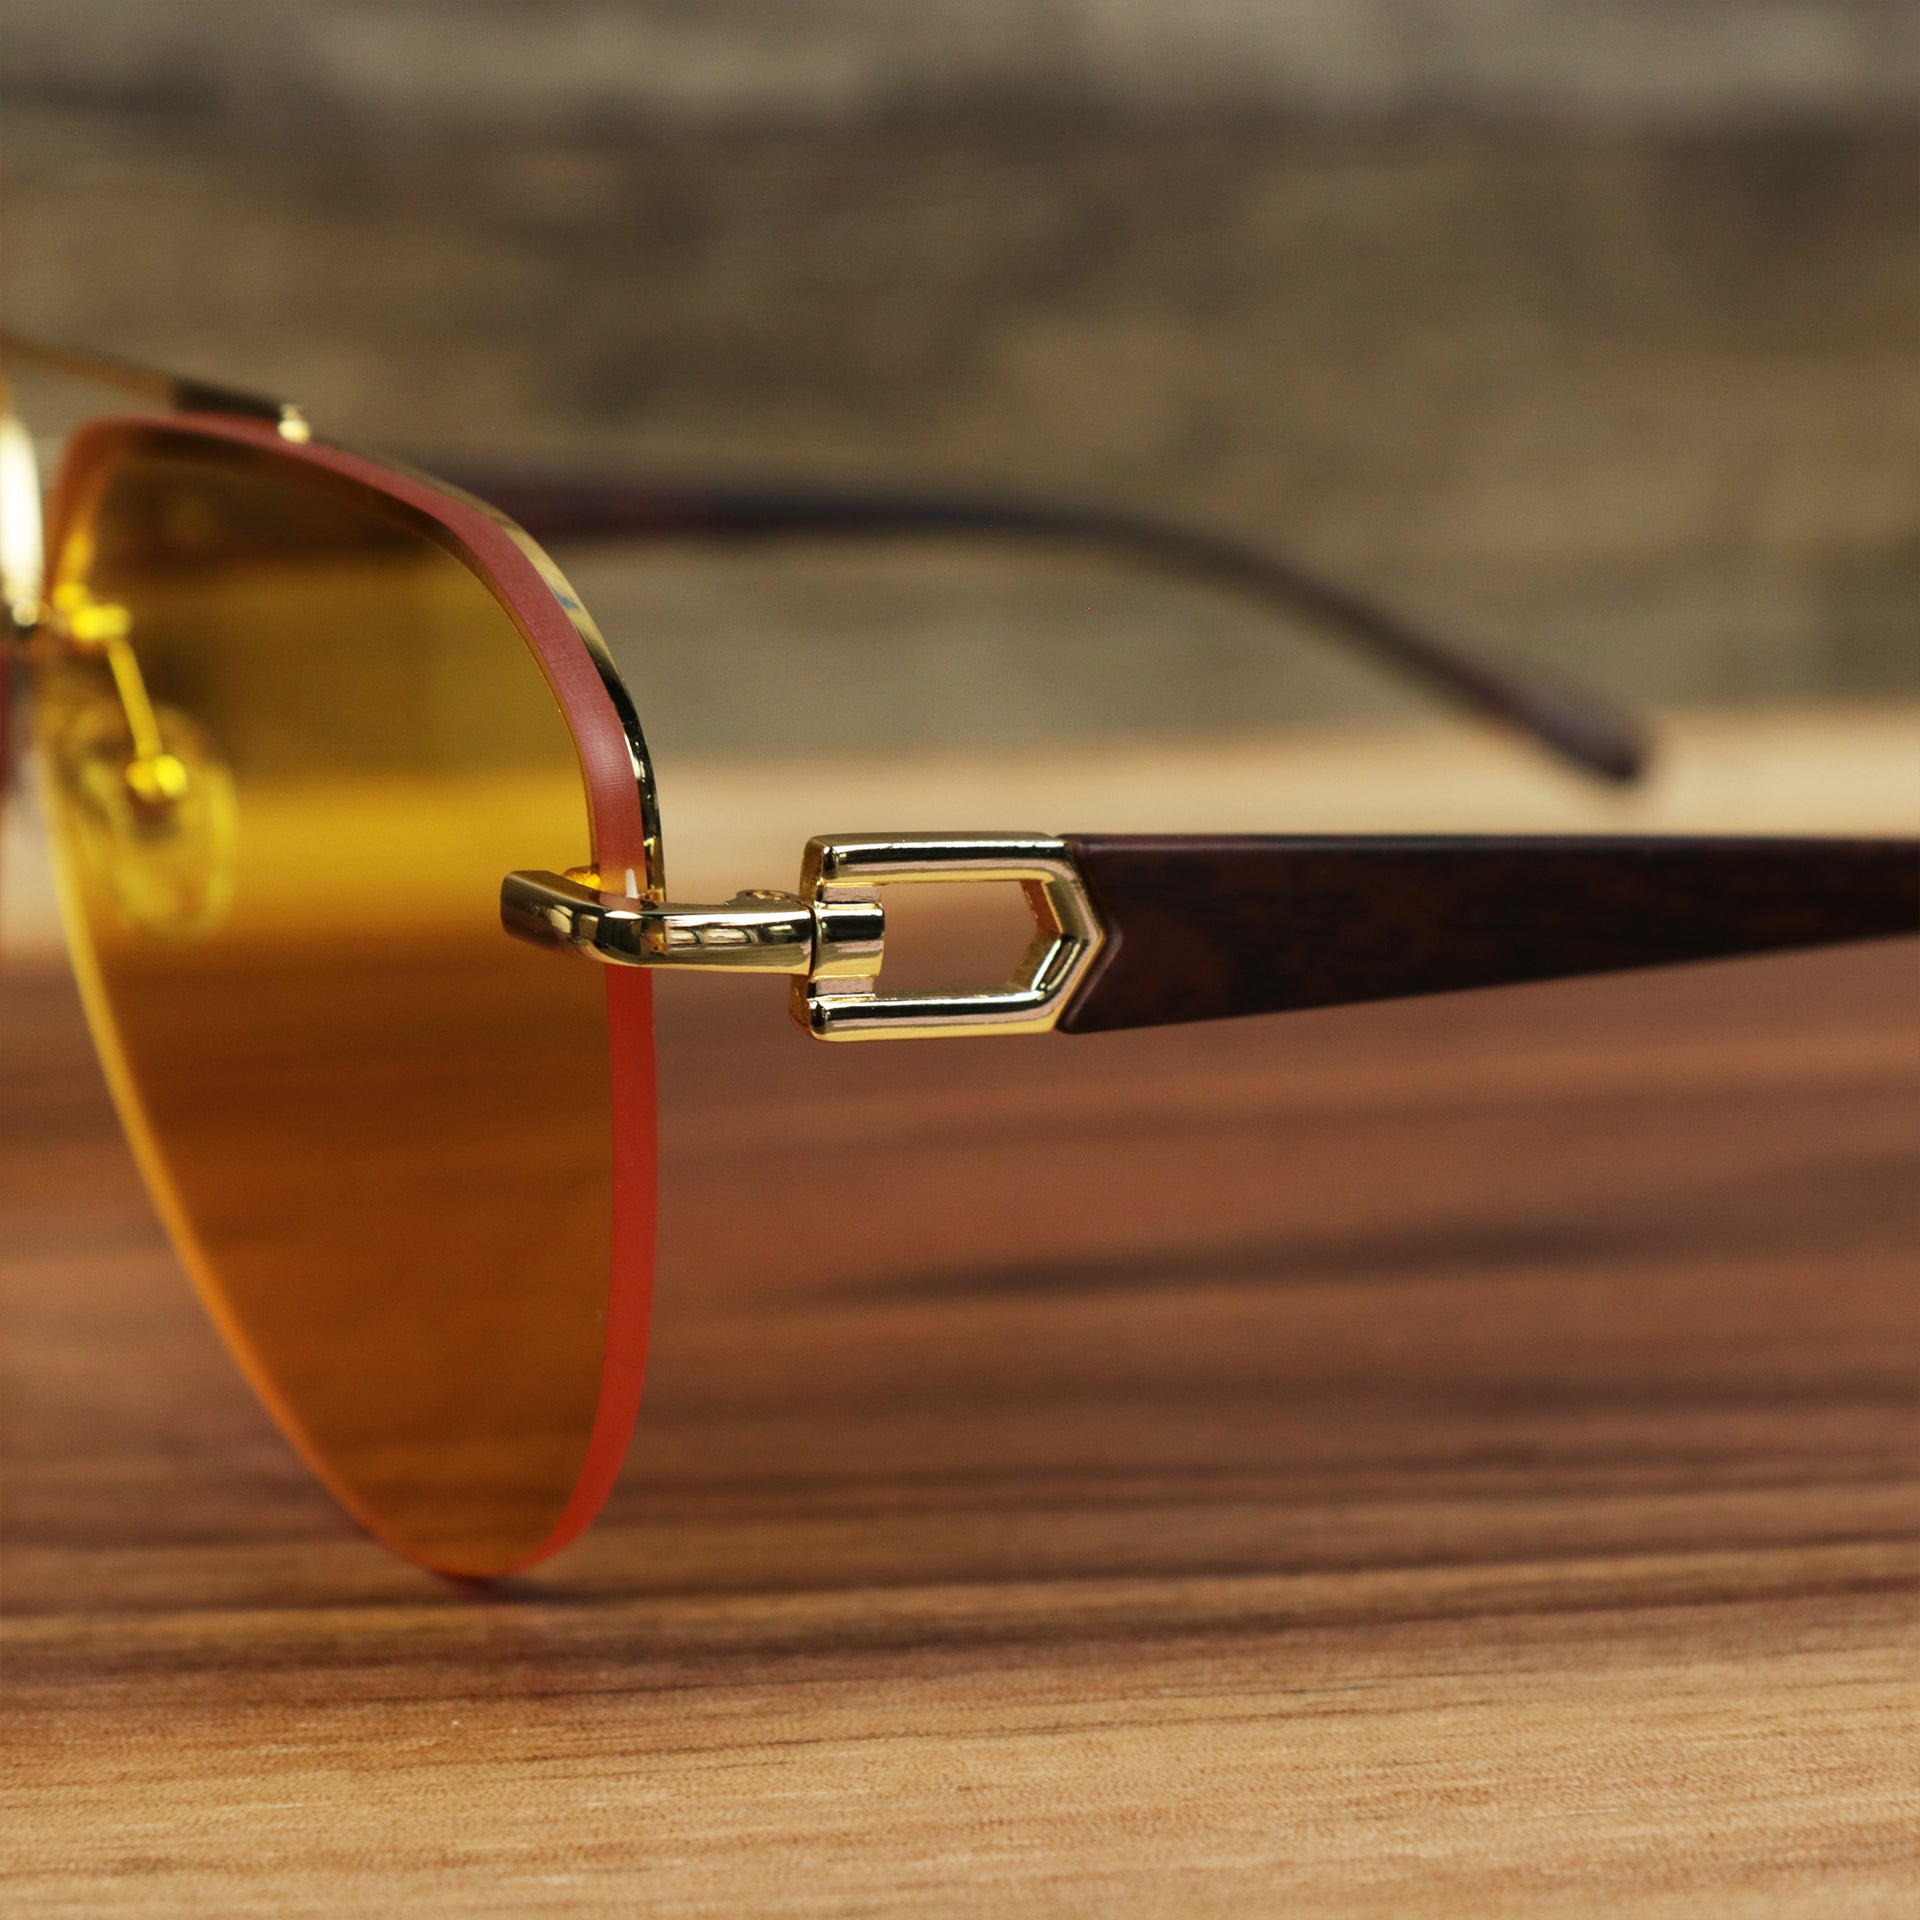 The hinge on the Round Aviator Frames Yellow Lens Sunglasses with Gold Frame